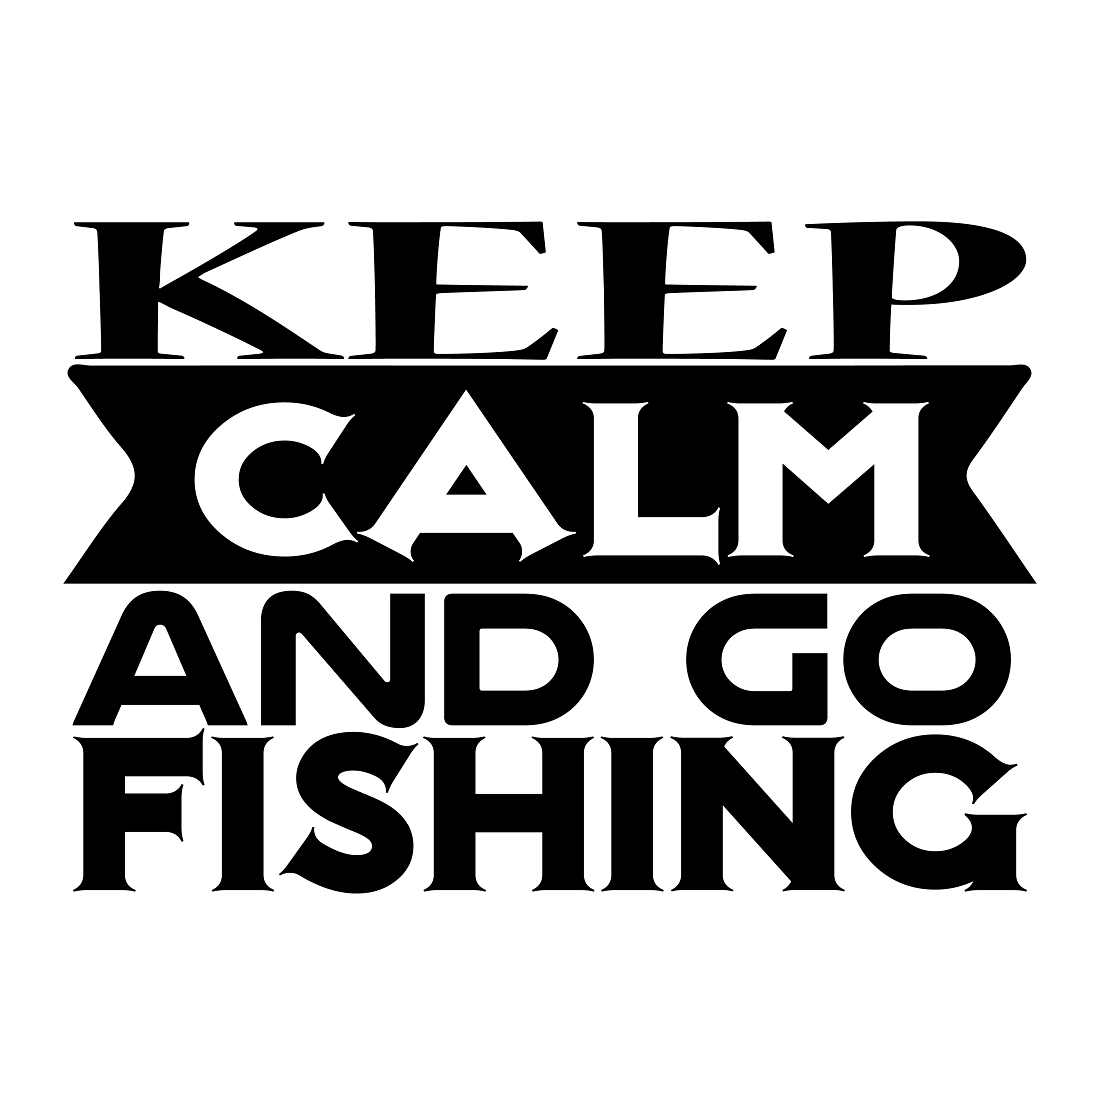 Keep calm and fishing preview image.